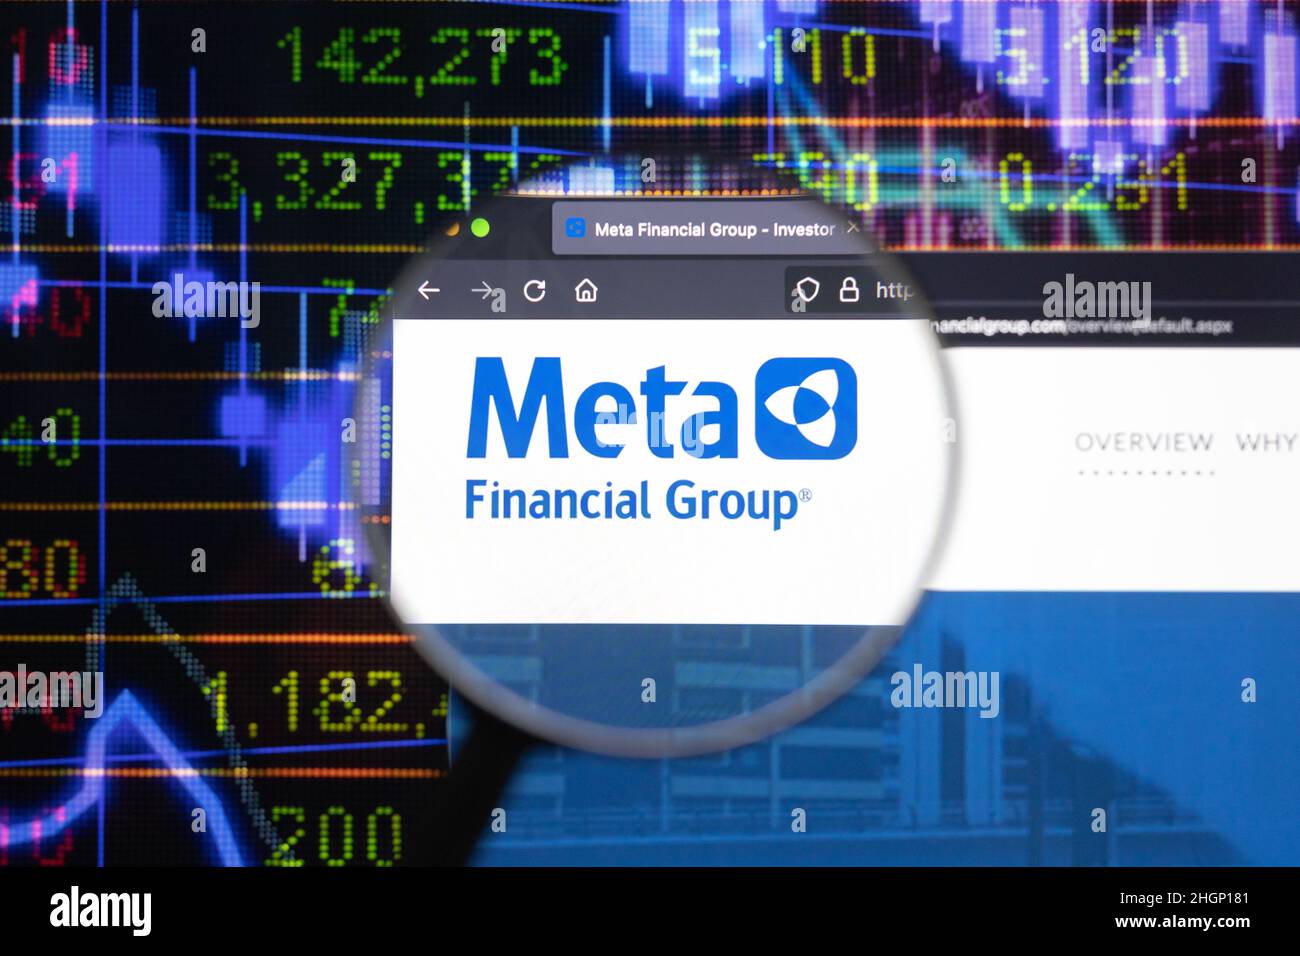 Meta Financial Group company logo on a website with blurry stock market developments in the background, seen on a computer screen Stock Photo